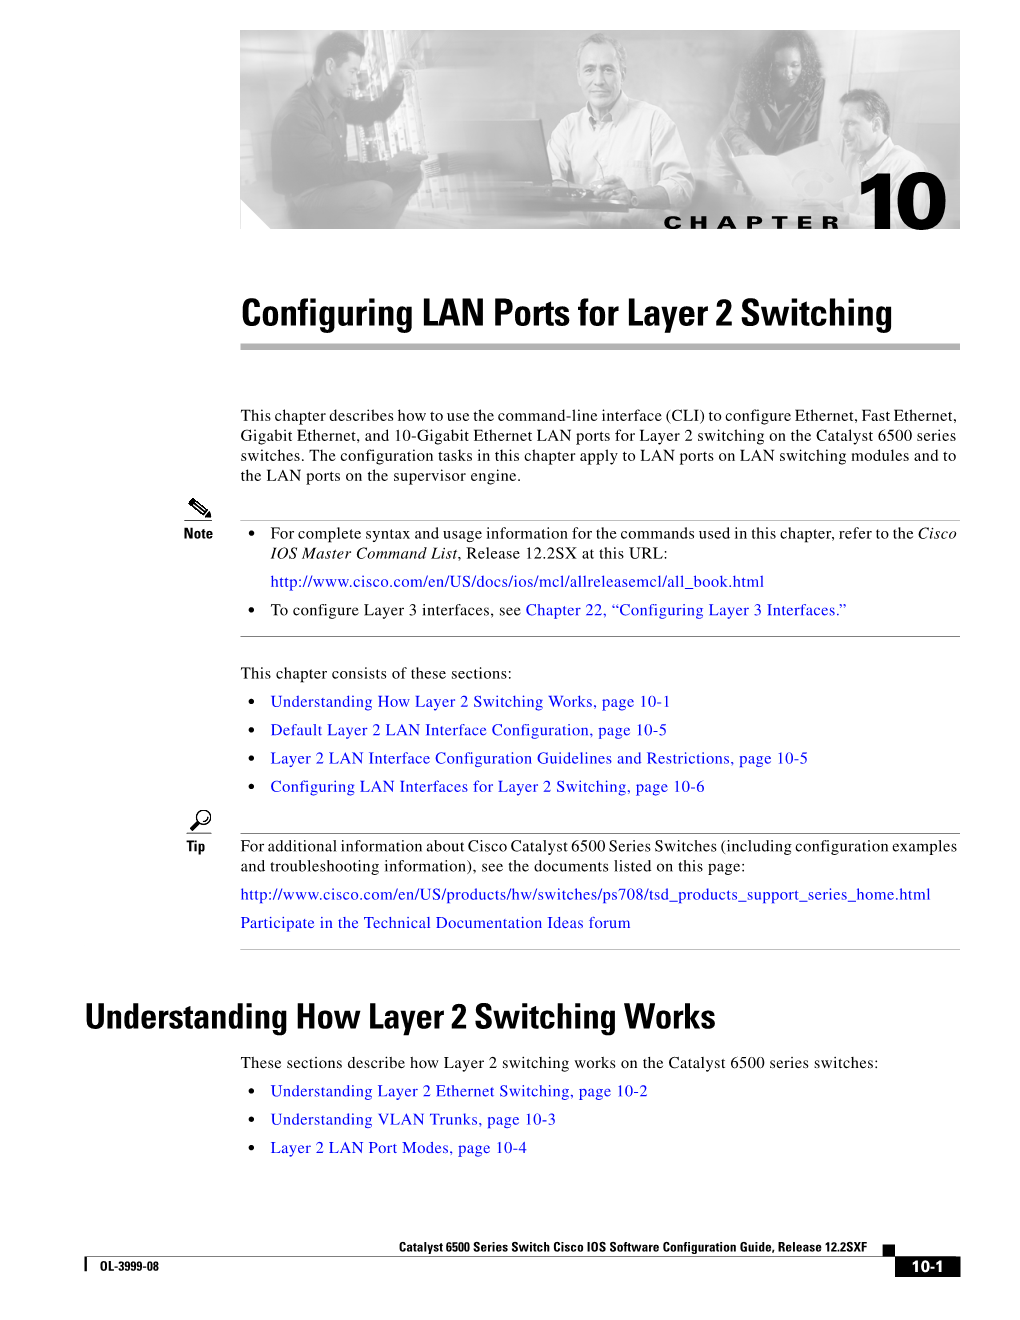 Configuring LAN Ports for Layer 2 Switching